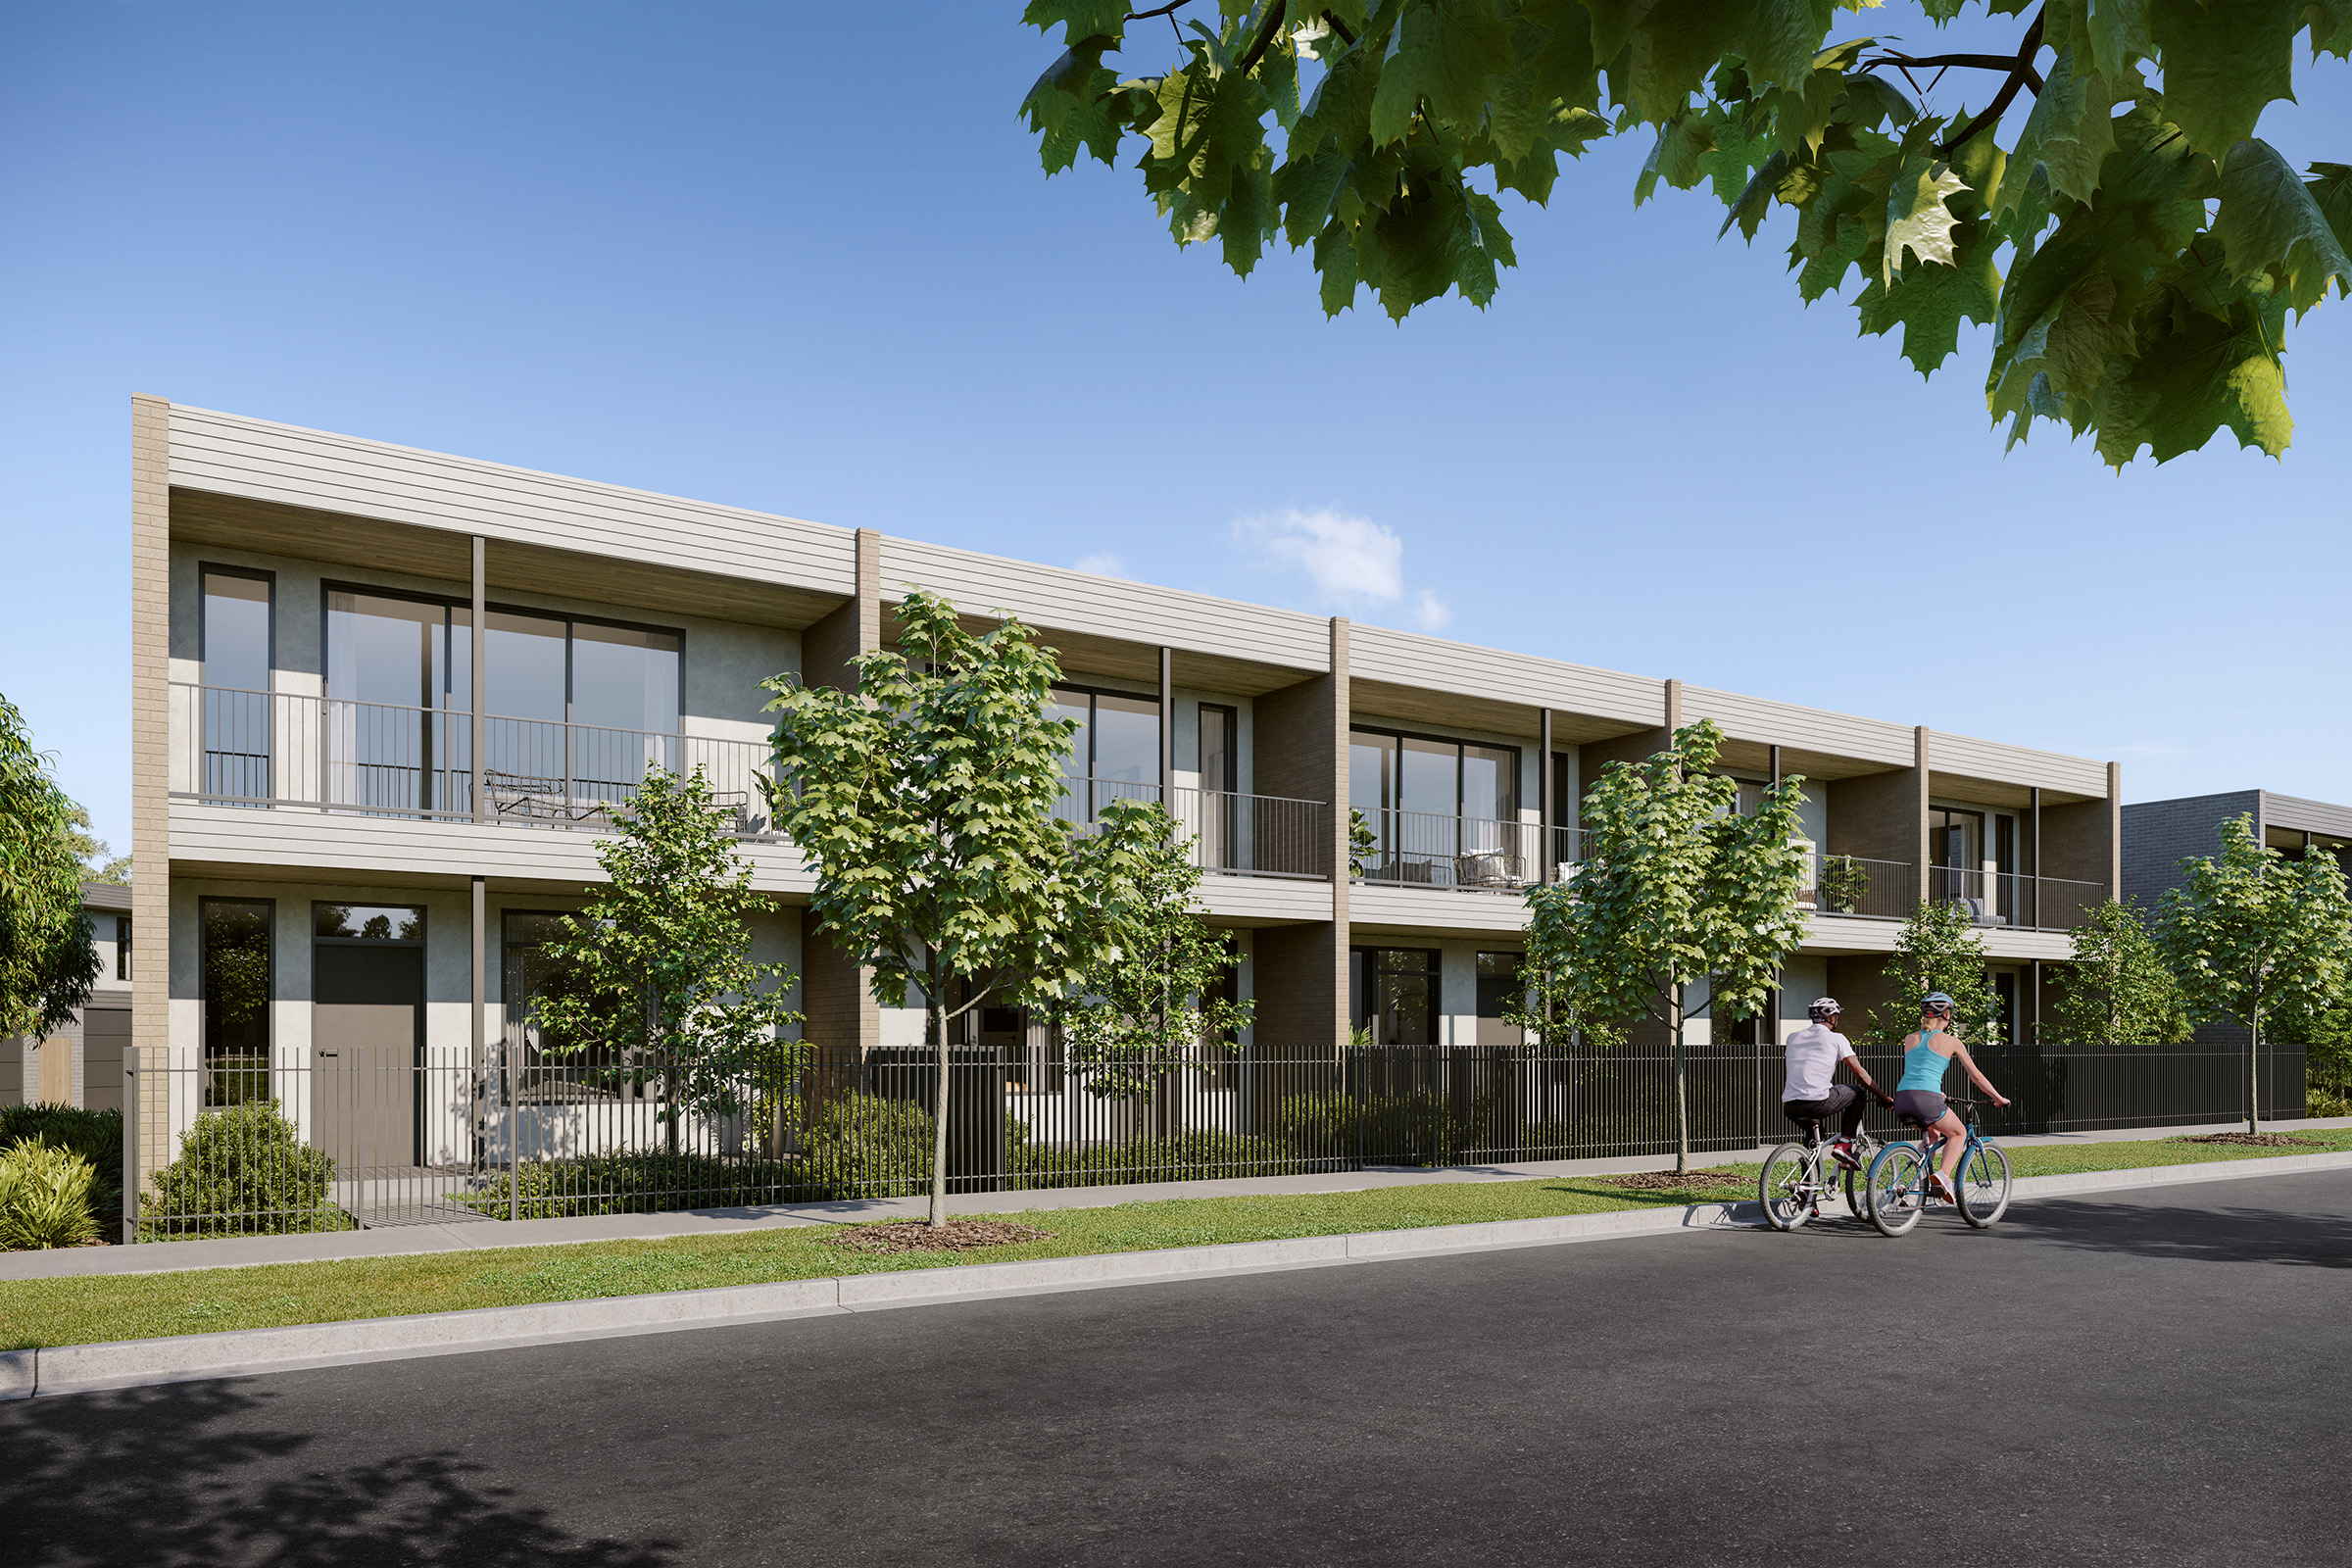 Artist impression - townhouses facing a street with two people riding bikes out the front 